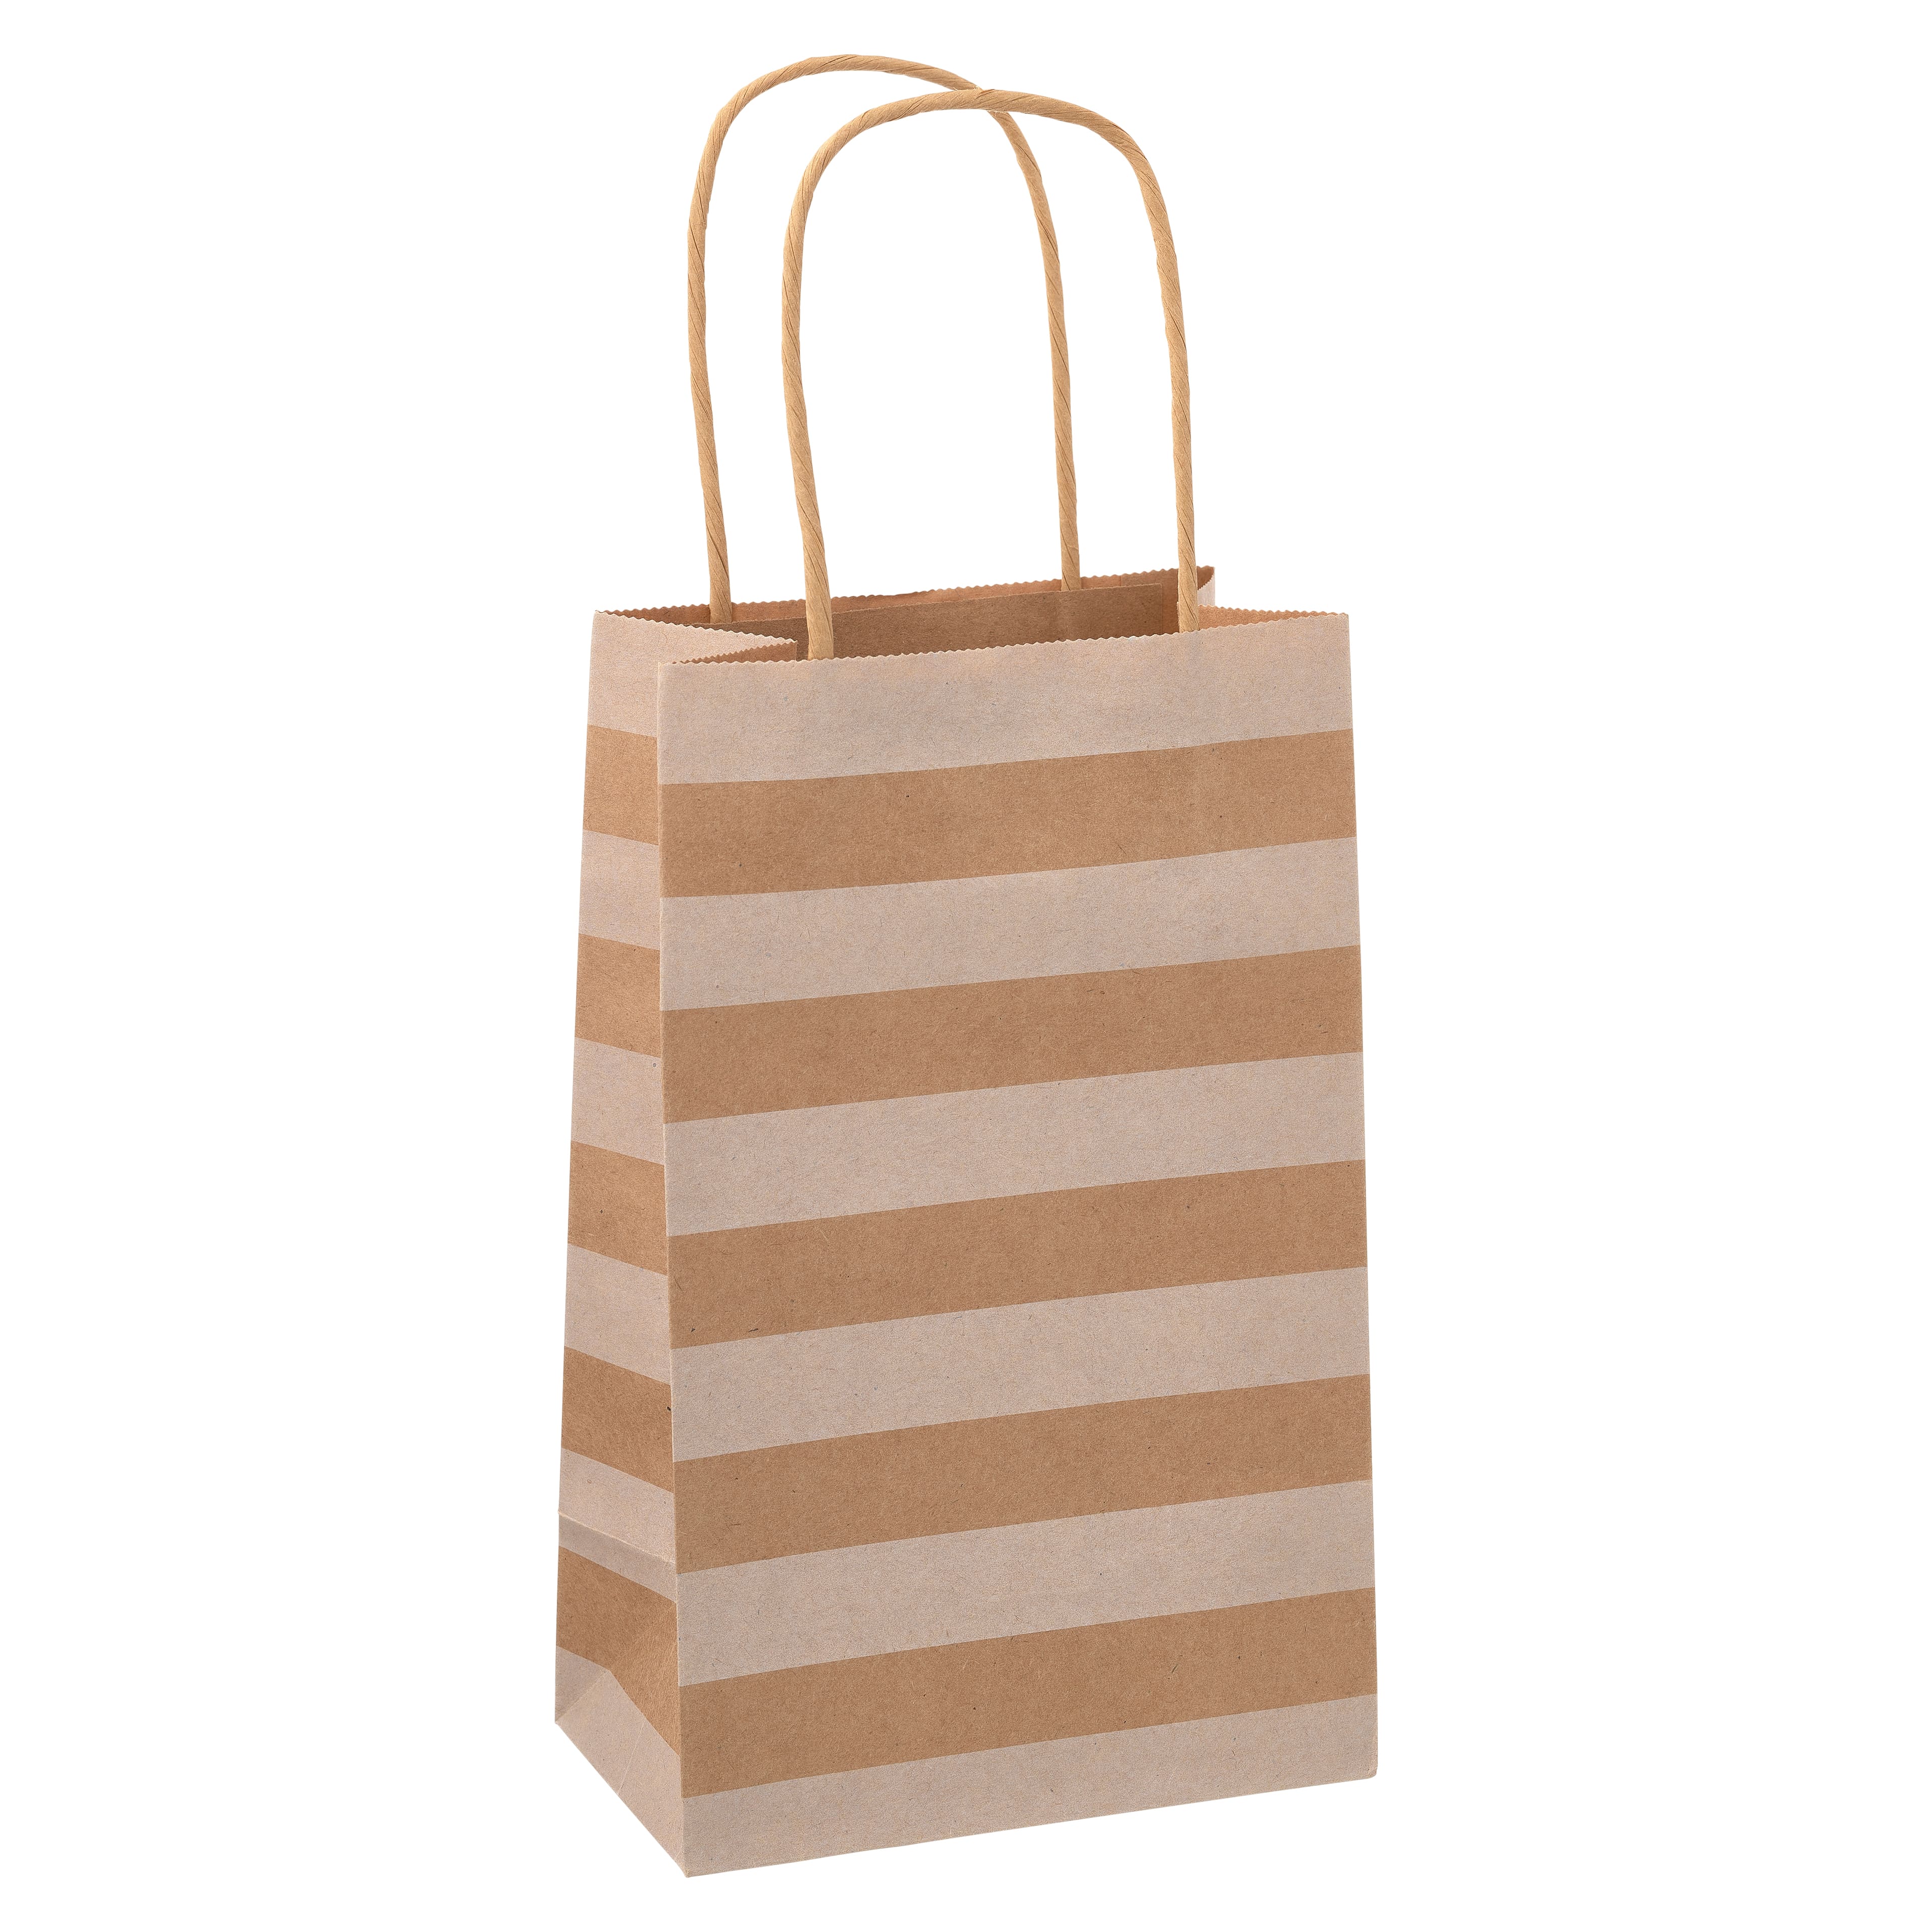  Small Kraft Dots &#x26; Stripes Paper Bag Value Pack by Celebrate It&#x2122; 